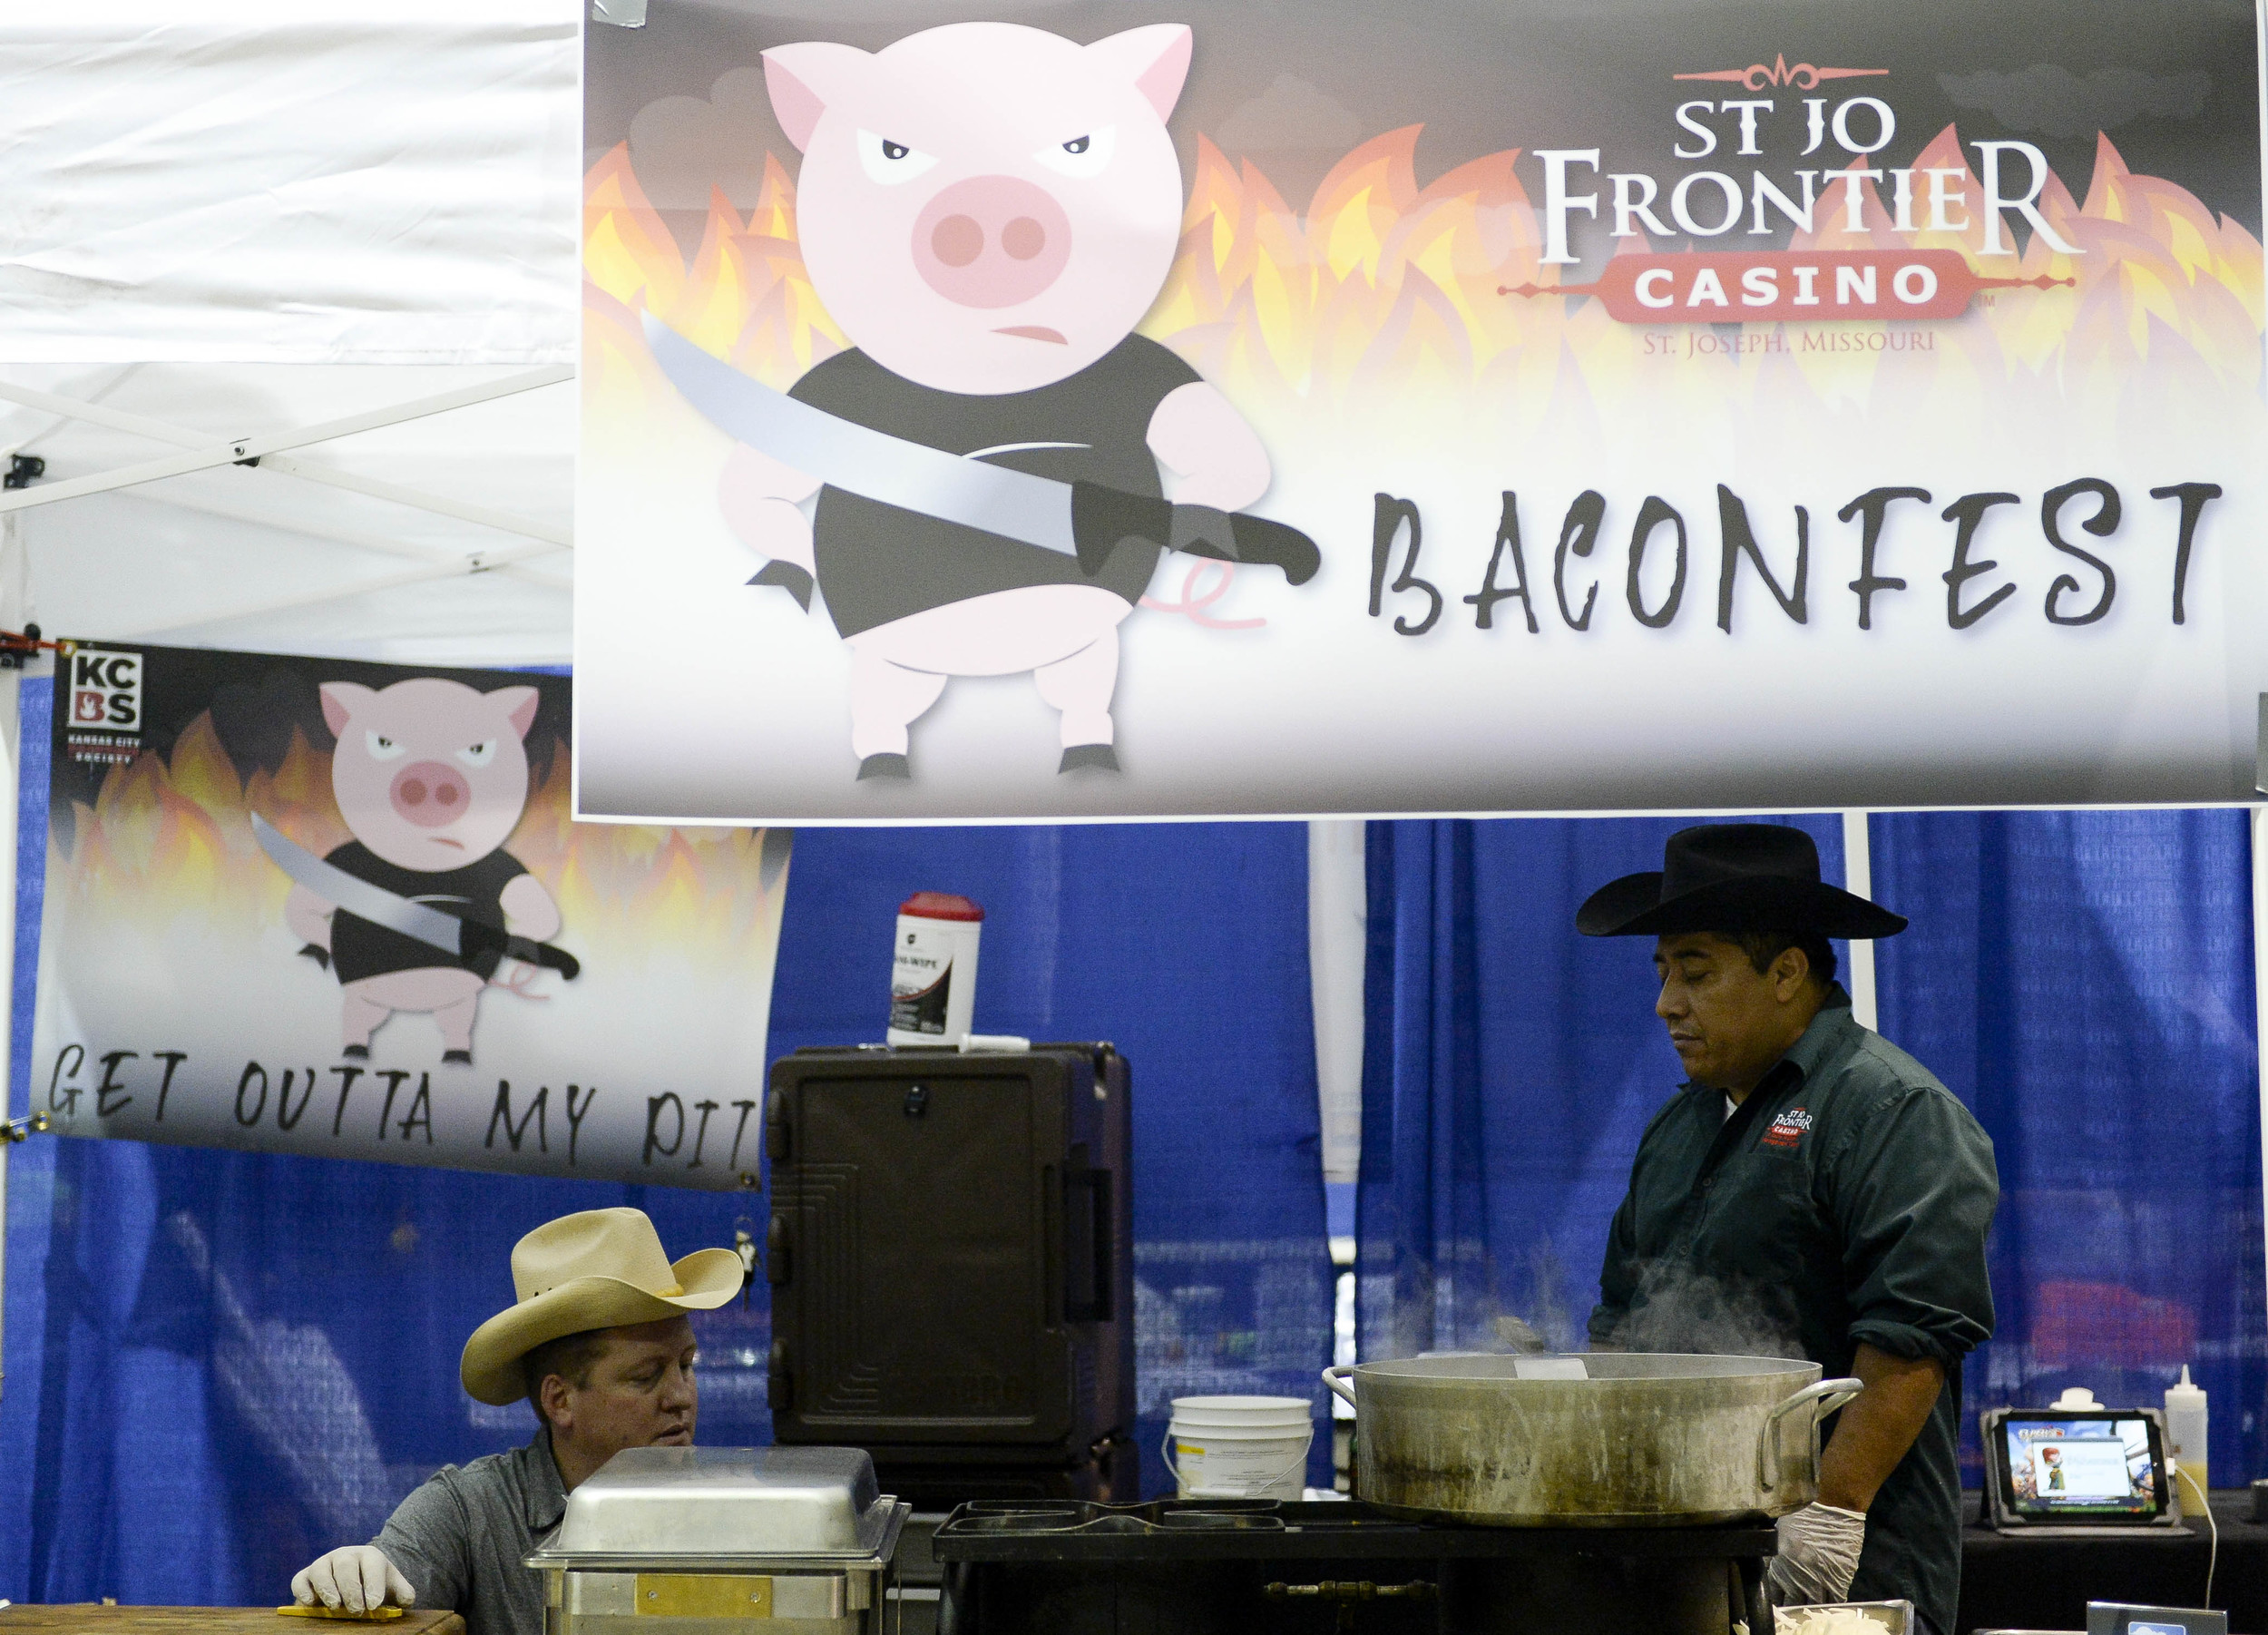   Brice Dewsbury, 28, and Jose Reys, 41, from the Frontier Casino prepare their bacon chicken fajitas for the recipe contest. “We were just sitting around drinking beer when I thought, ‘Why not make bacon fajitas?’” Dewsbury said.&nbsp;  